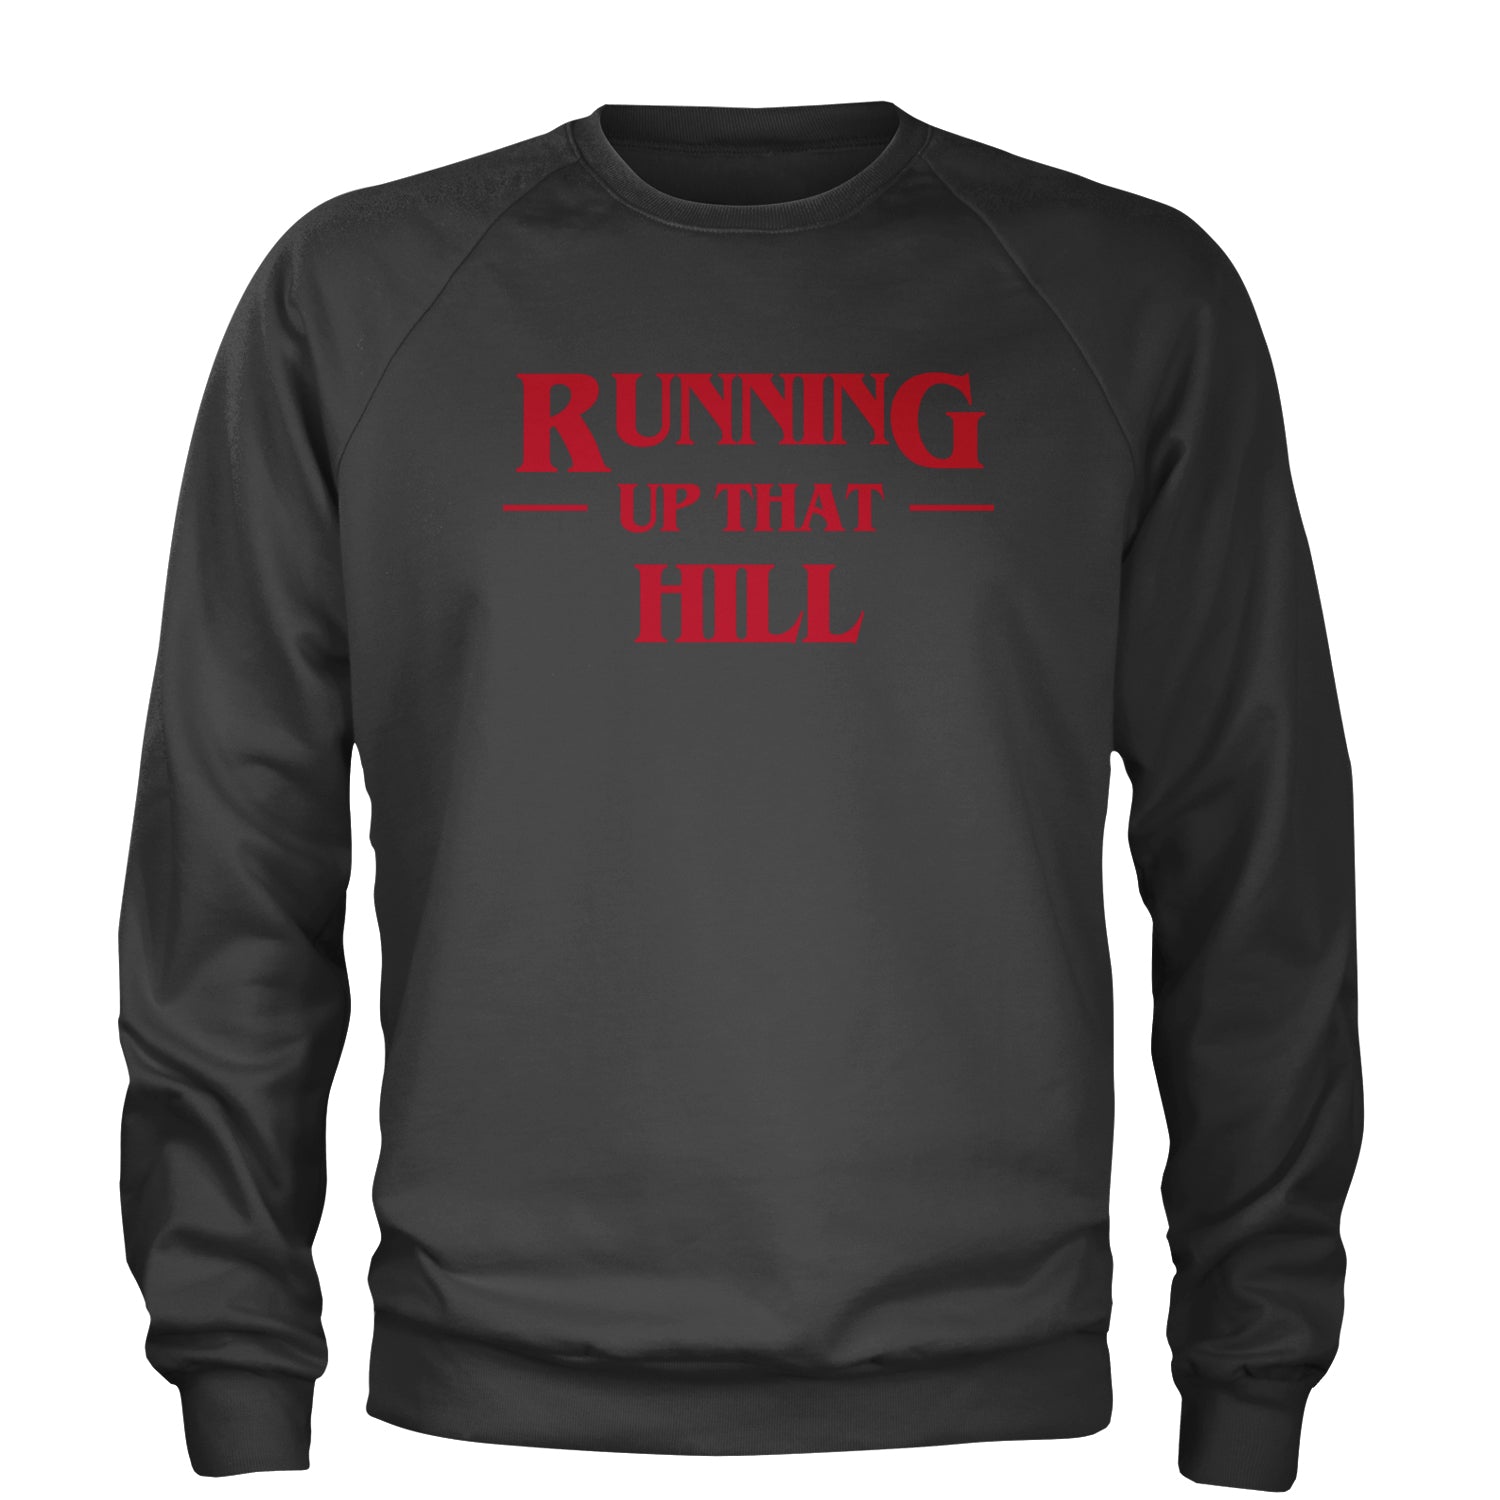 Running Up That Hill Adult Crewneck Sweatshirt 4, don’t, eleven, four, friends, lie, season by Expression Tees